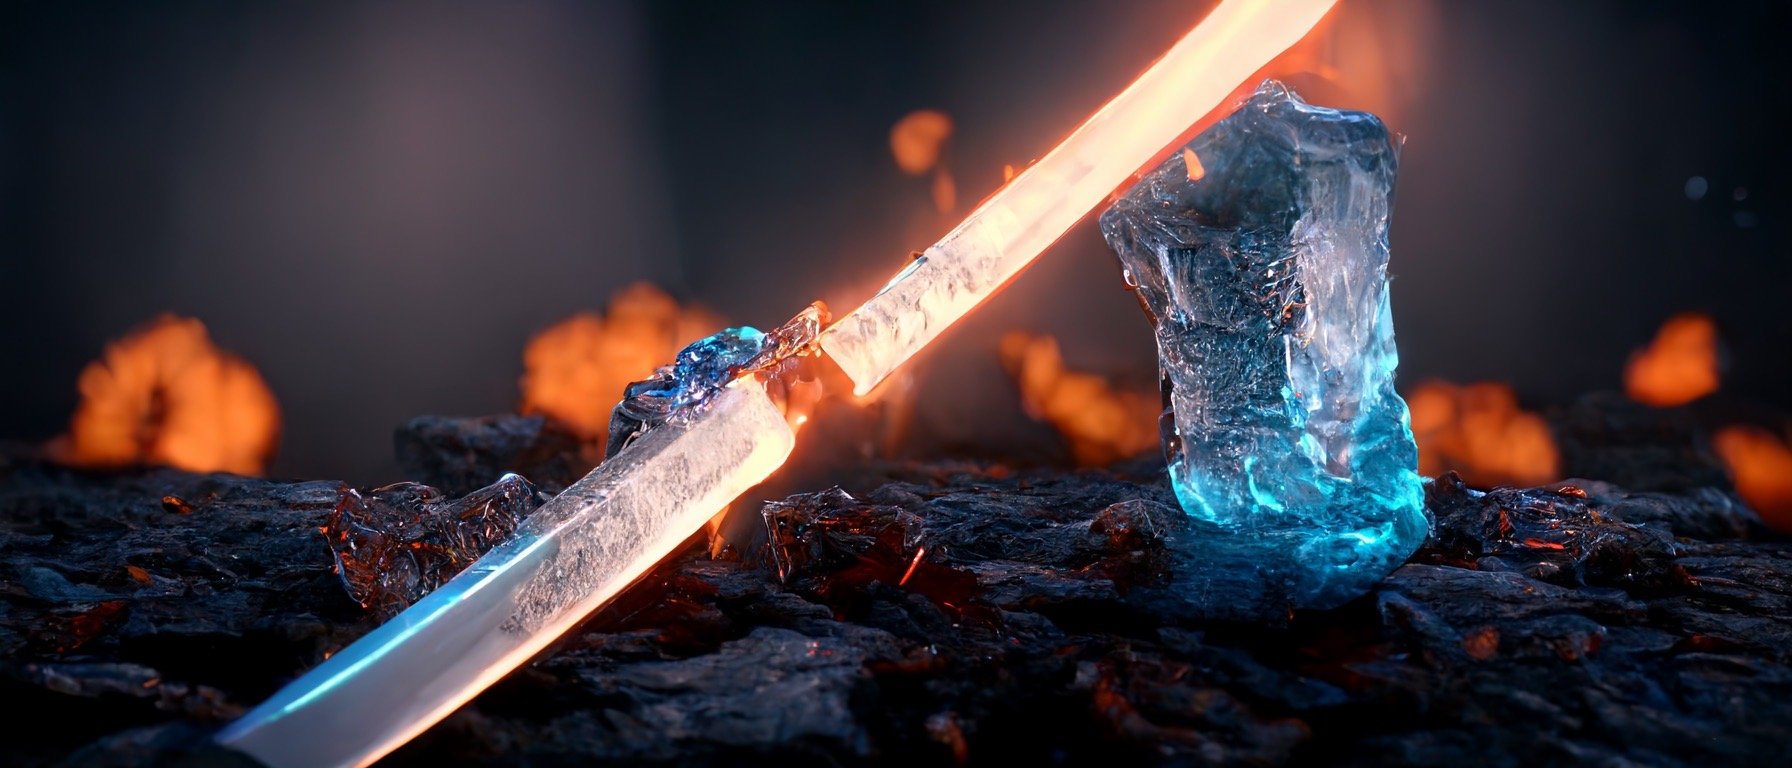 25c6a8f0-1e1f-4a93-b11a-982f0c4286c1_S3RAPH_httpss.mj.run2gJttk__frozen_steal_Japanese_sword_katana_as_the_focal_point._in_an_ice_cave_with_refl.JPG